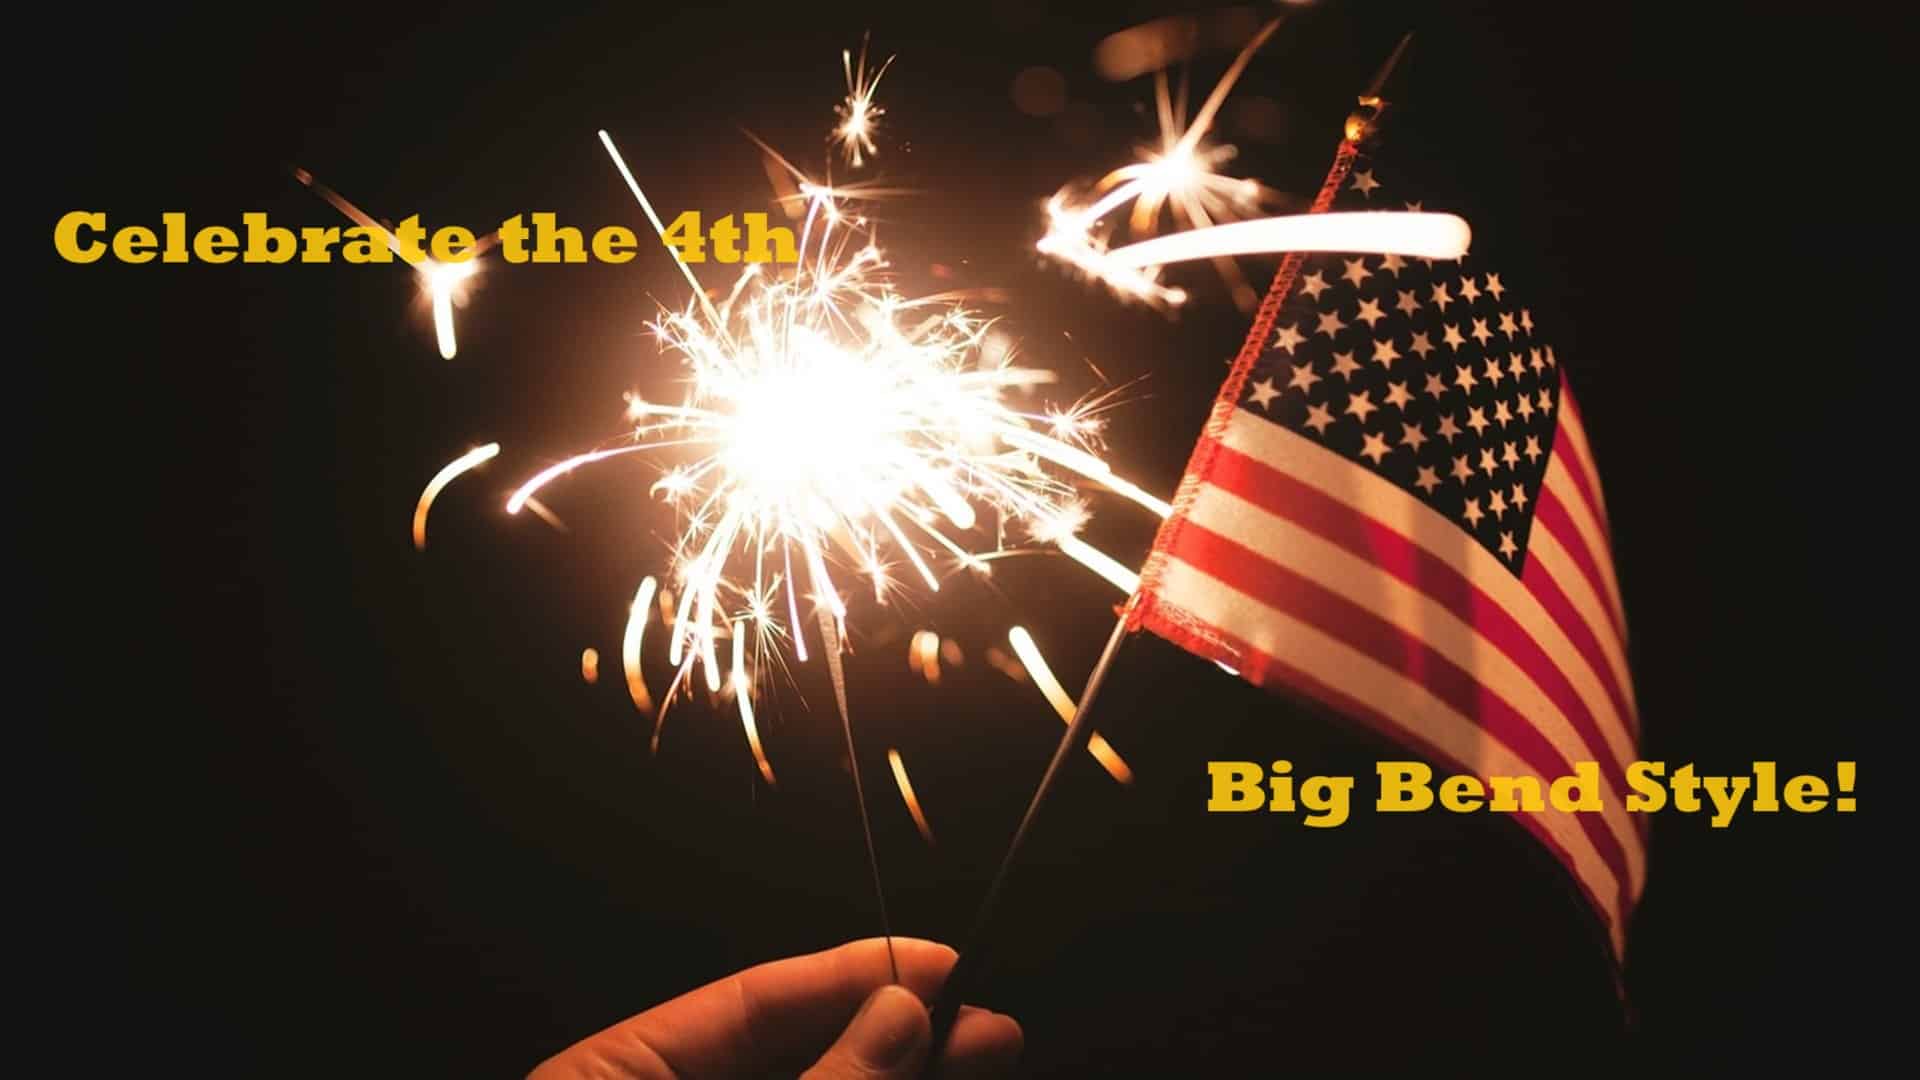 A hand holding a flag and sparkler. The words say Celebrate the 4th Big Bend Style